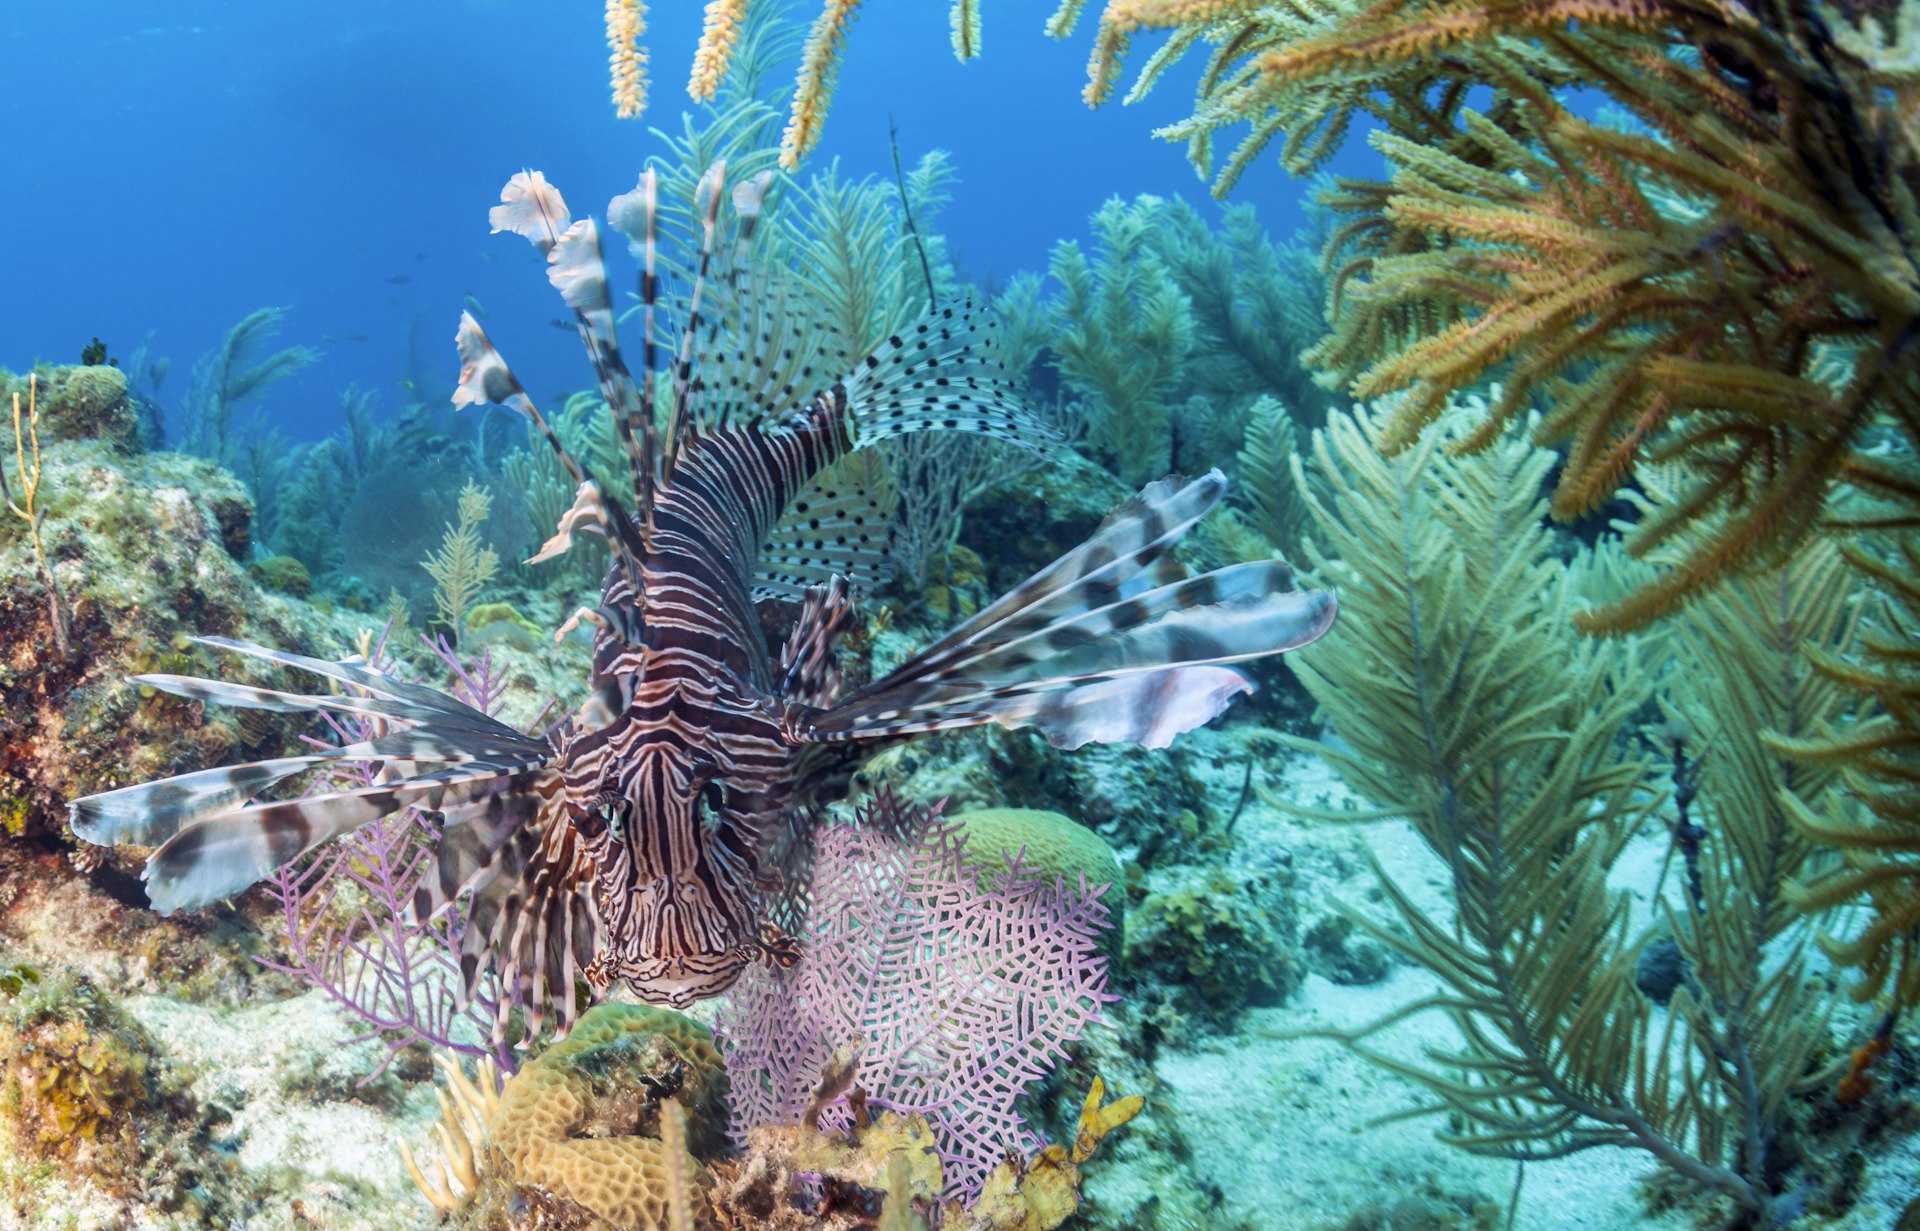 A red lionfish, which has scales that create a striped pattern and fins that splay out like wings, swims towards the camera in the waters off the coast of Honduras